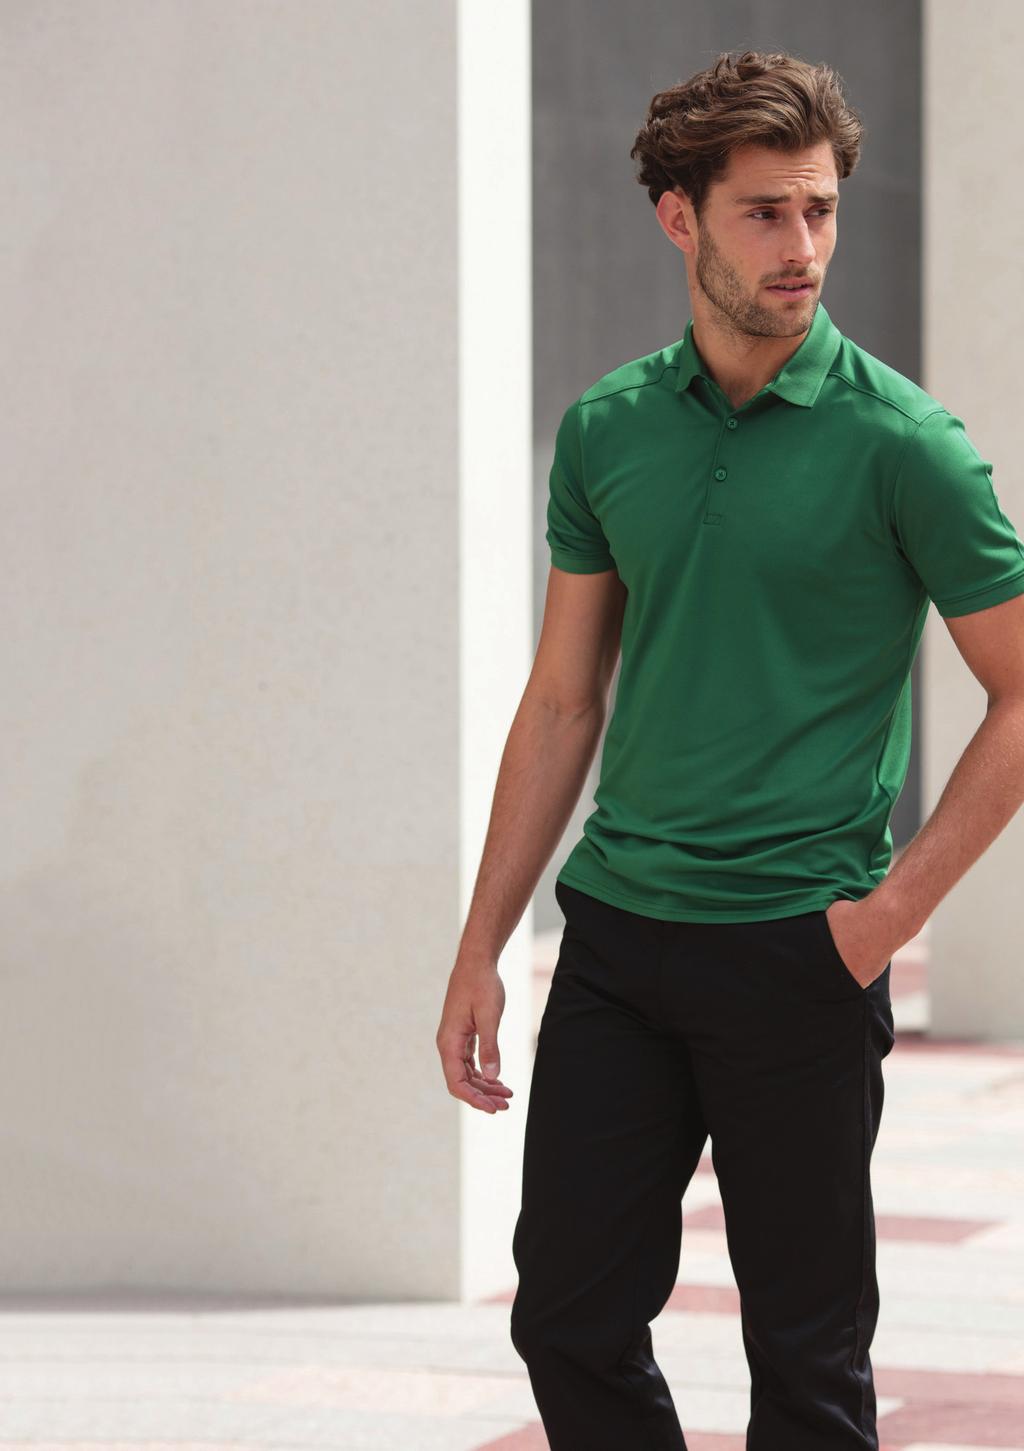 MEN S AND LADIES STRETCH WICKING POLO SHIRTS H460 H461 Stretch wicking fabric technology. Slimmer fit with 3 button placket. Front and back shoulder yoke detail. 1x1 ribbed collar and cuffs.